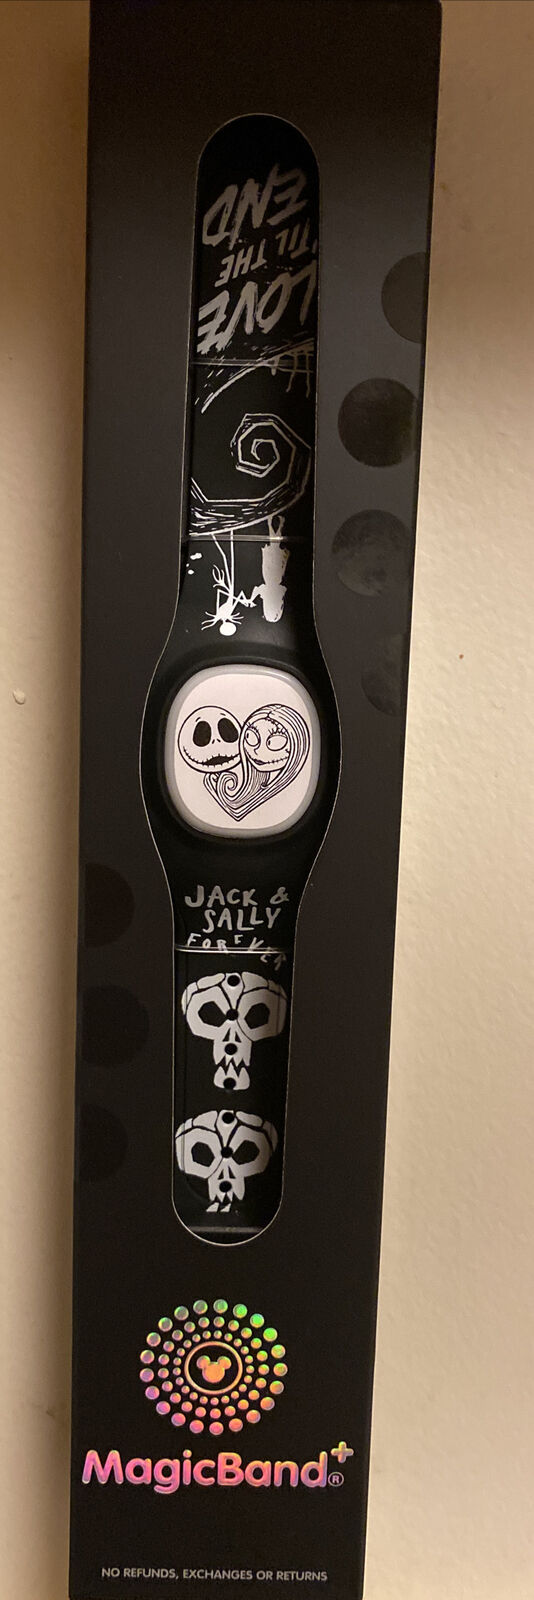 Disney Parks Jack & Sally MagicBand Plus + Nightmare Before Christmas - NEW